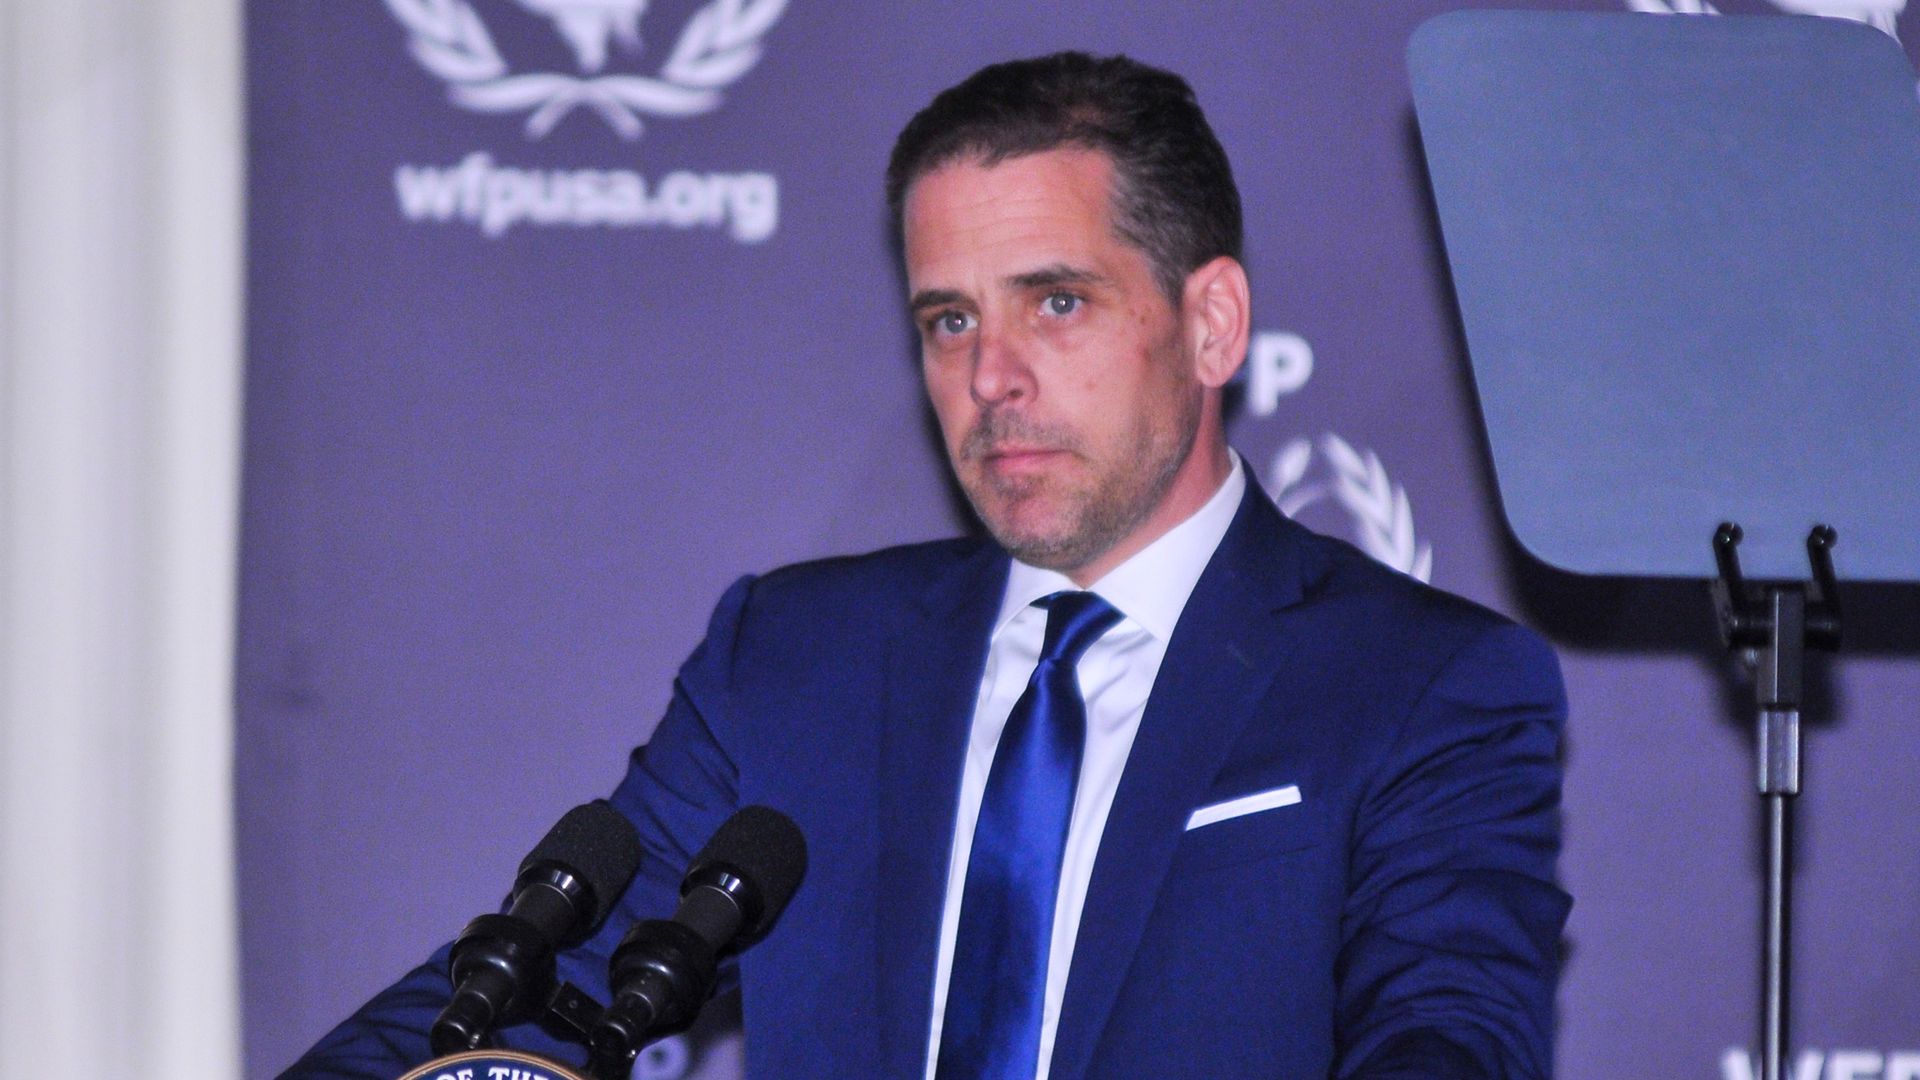 Hunter Biden made a deal with the DOJ that doesn't include jail time but many believe he got off too easily and there's more to investigate.